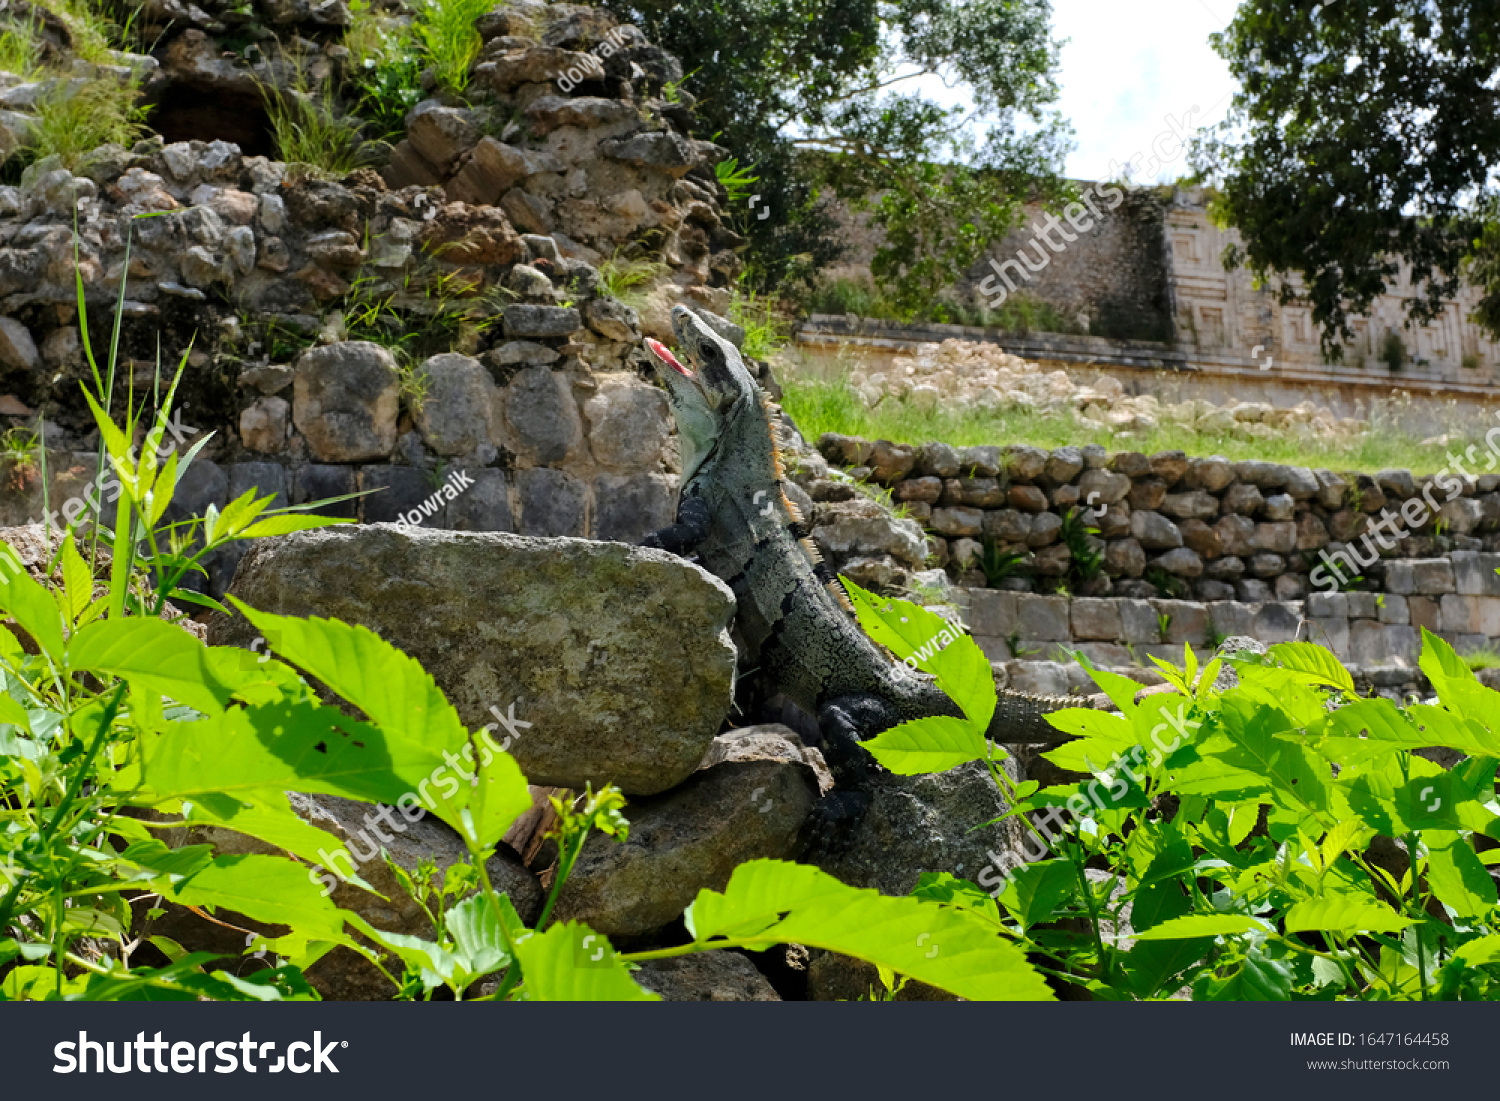 Wild Iguana is climbing and sunbathing on the rock. Iguana is a herbivorous lizards that are native to tropical areas of Mexico, Central America, South America, and the Caribbean. #1647164458